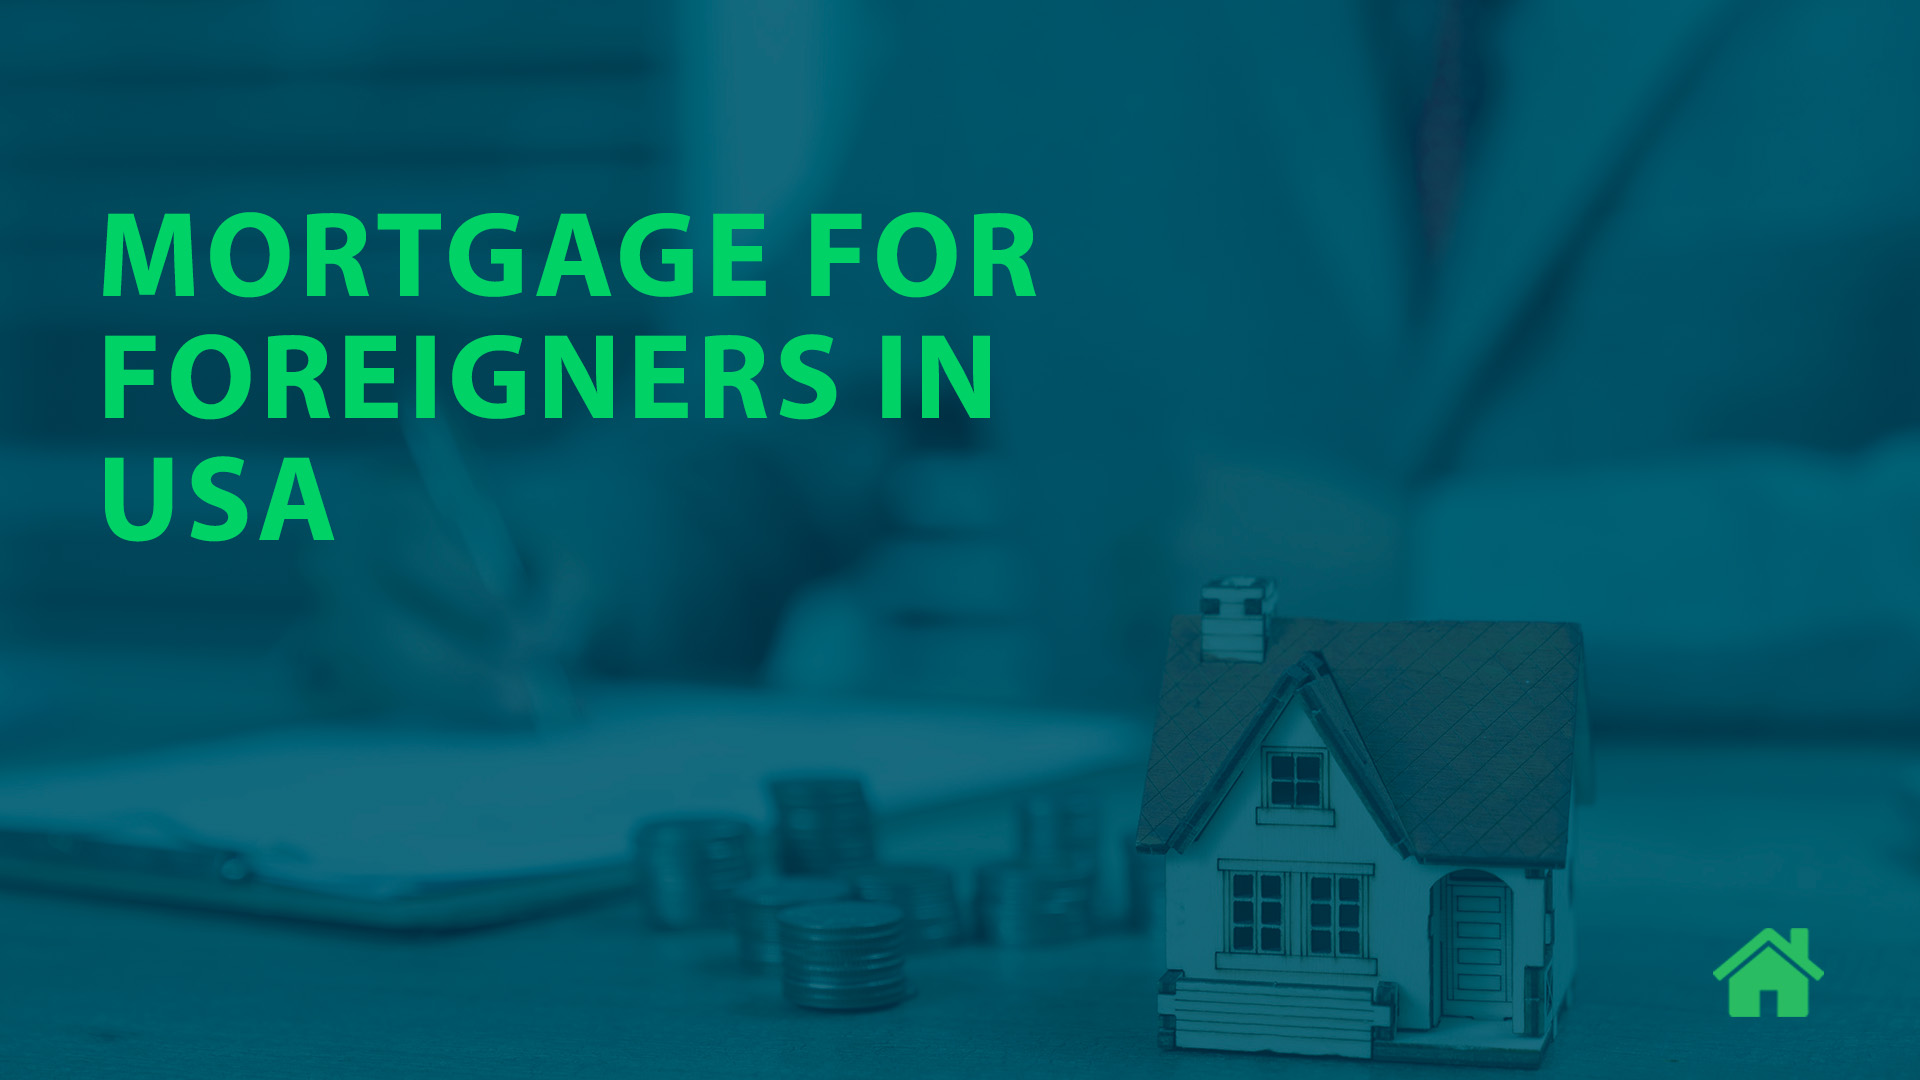 Mortgage for foreigners in usa